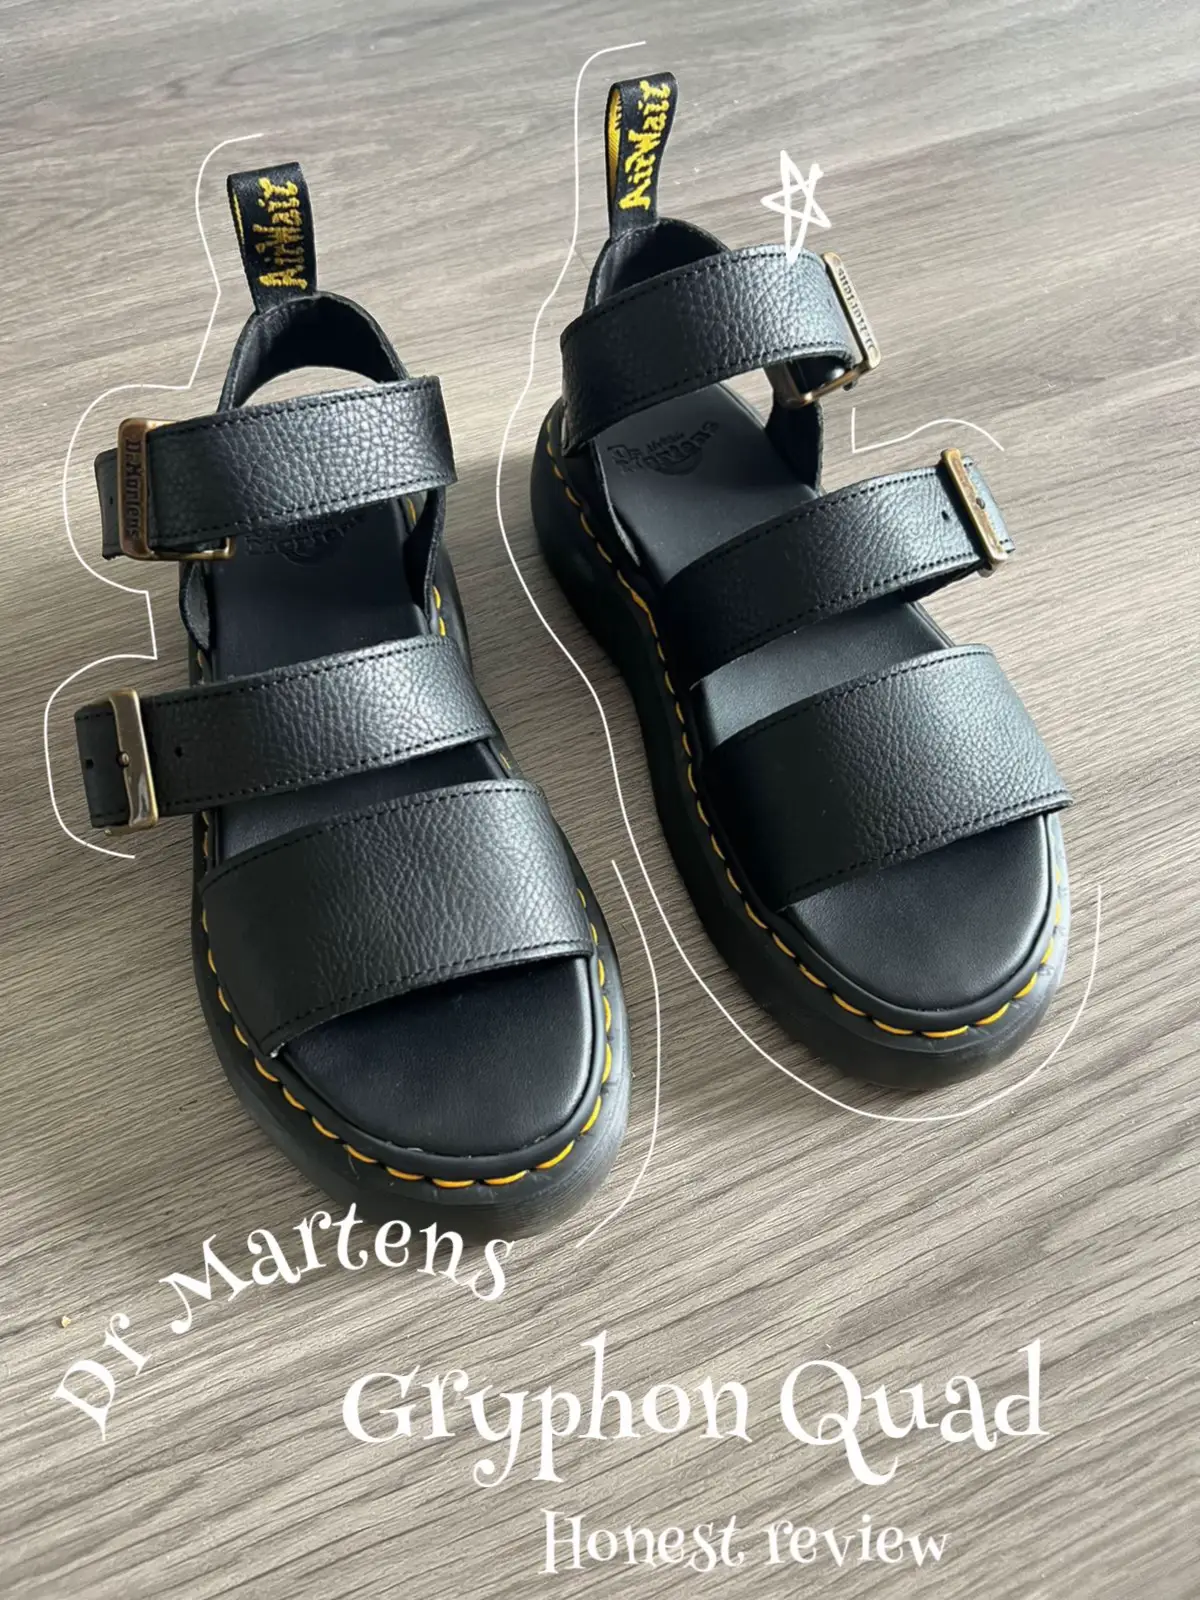 Dr Martens Gryphon Quads honest review | Gallery posted by